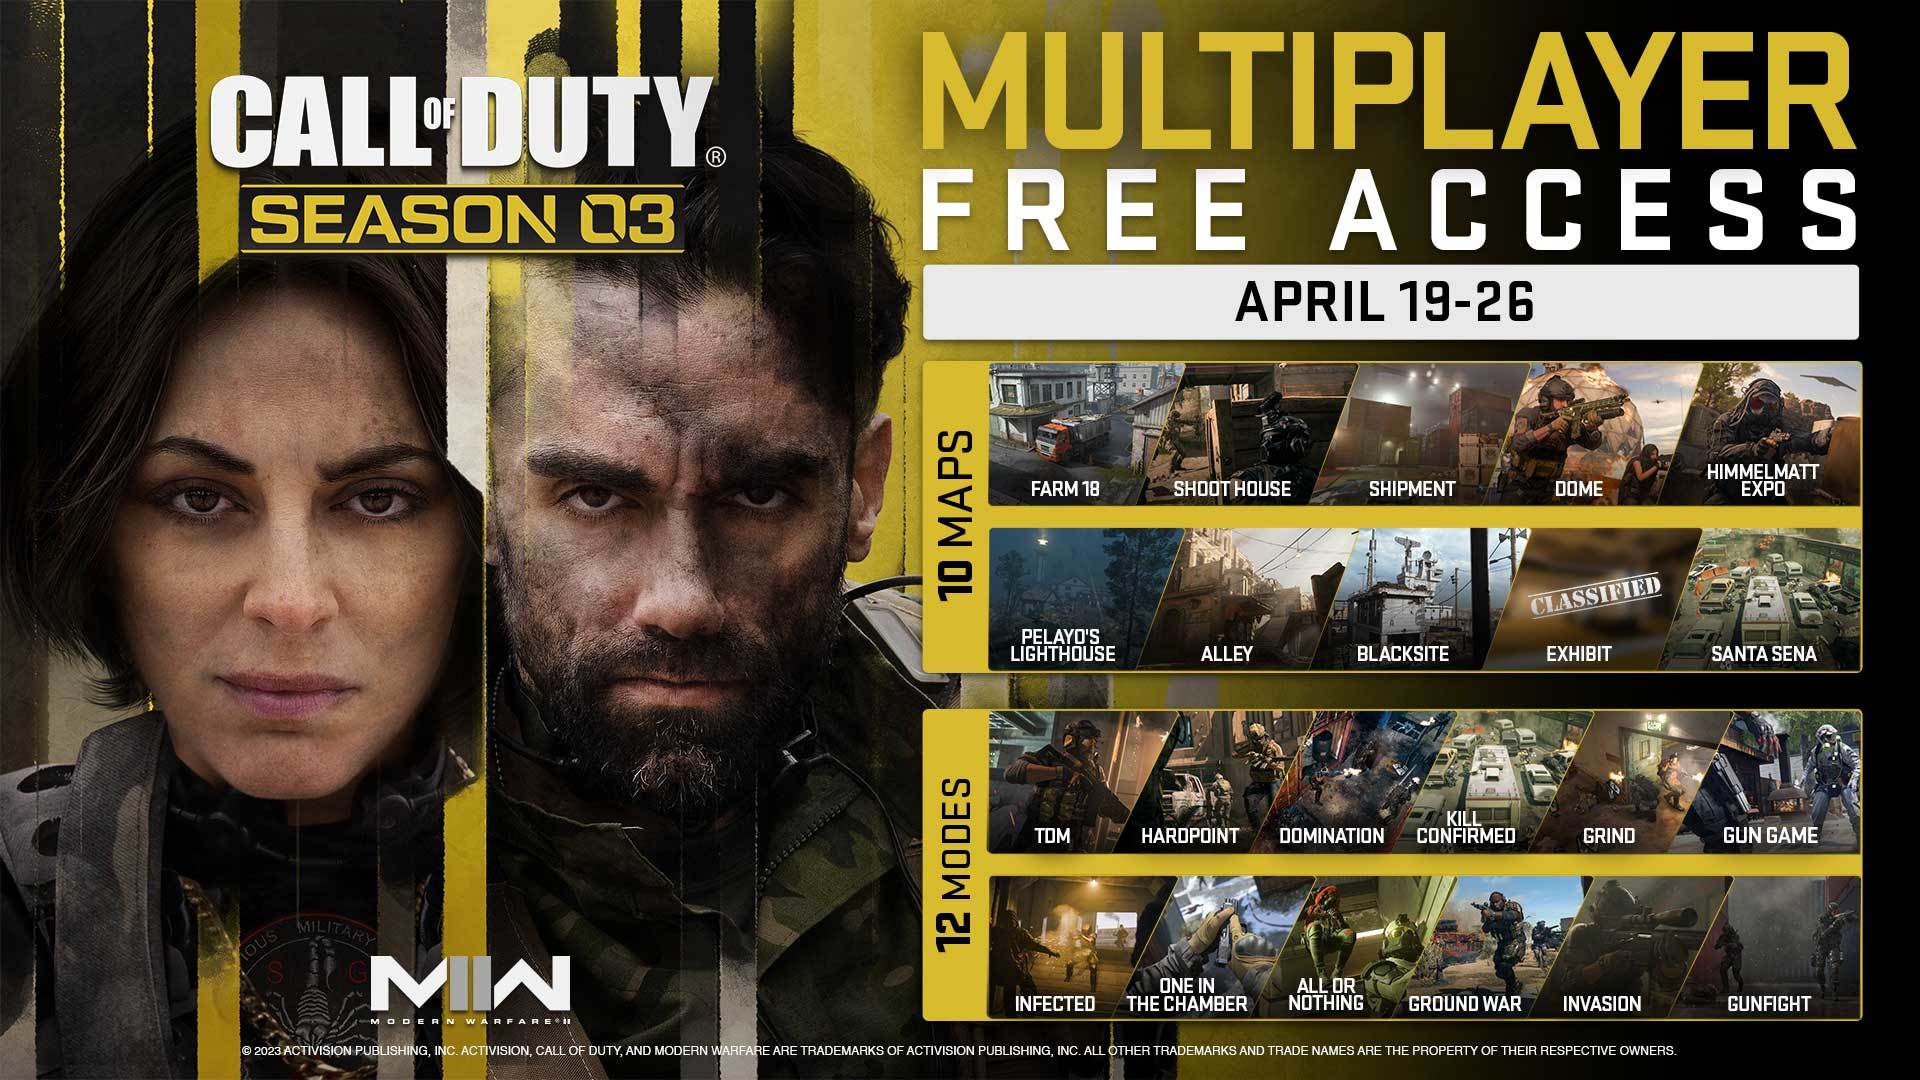 Play Call of Duty: Modern Warfare II for free until April 26